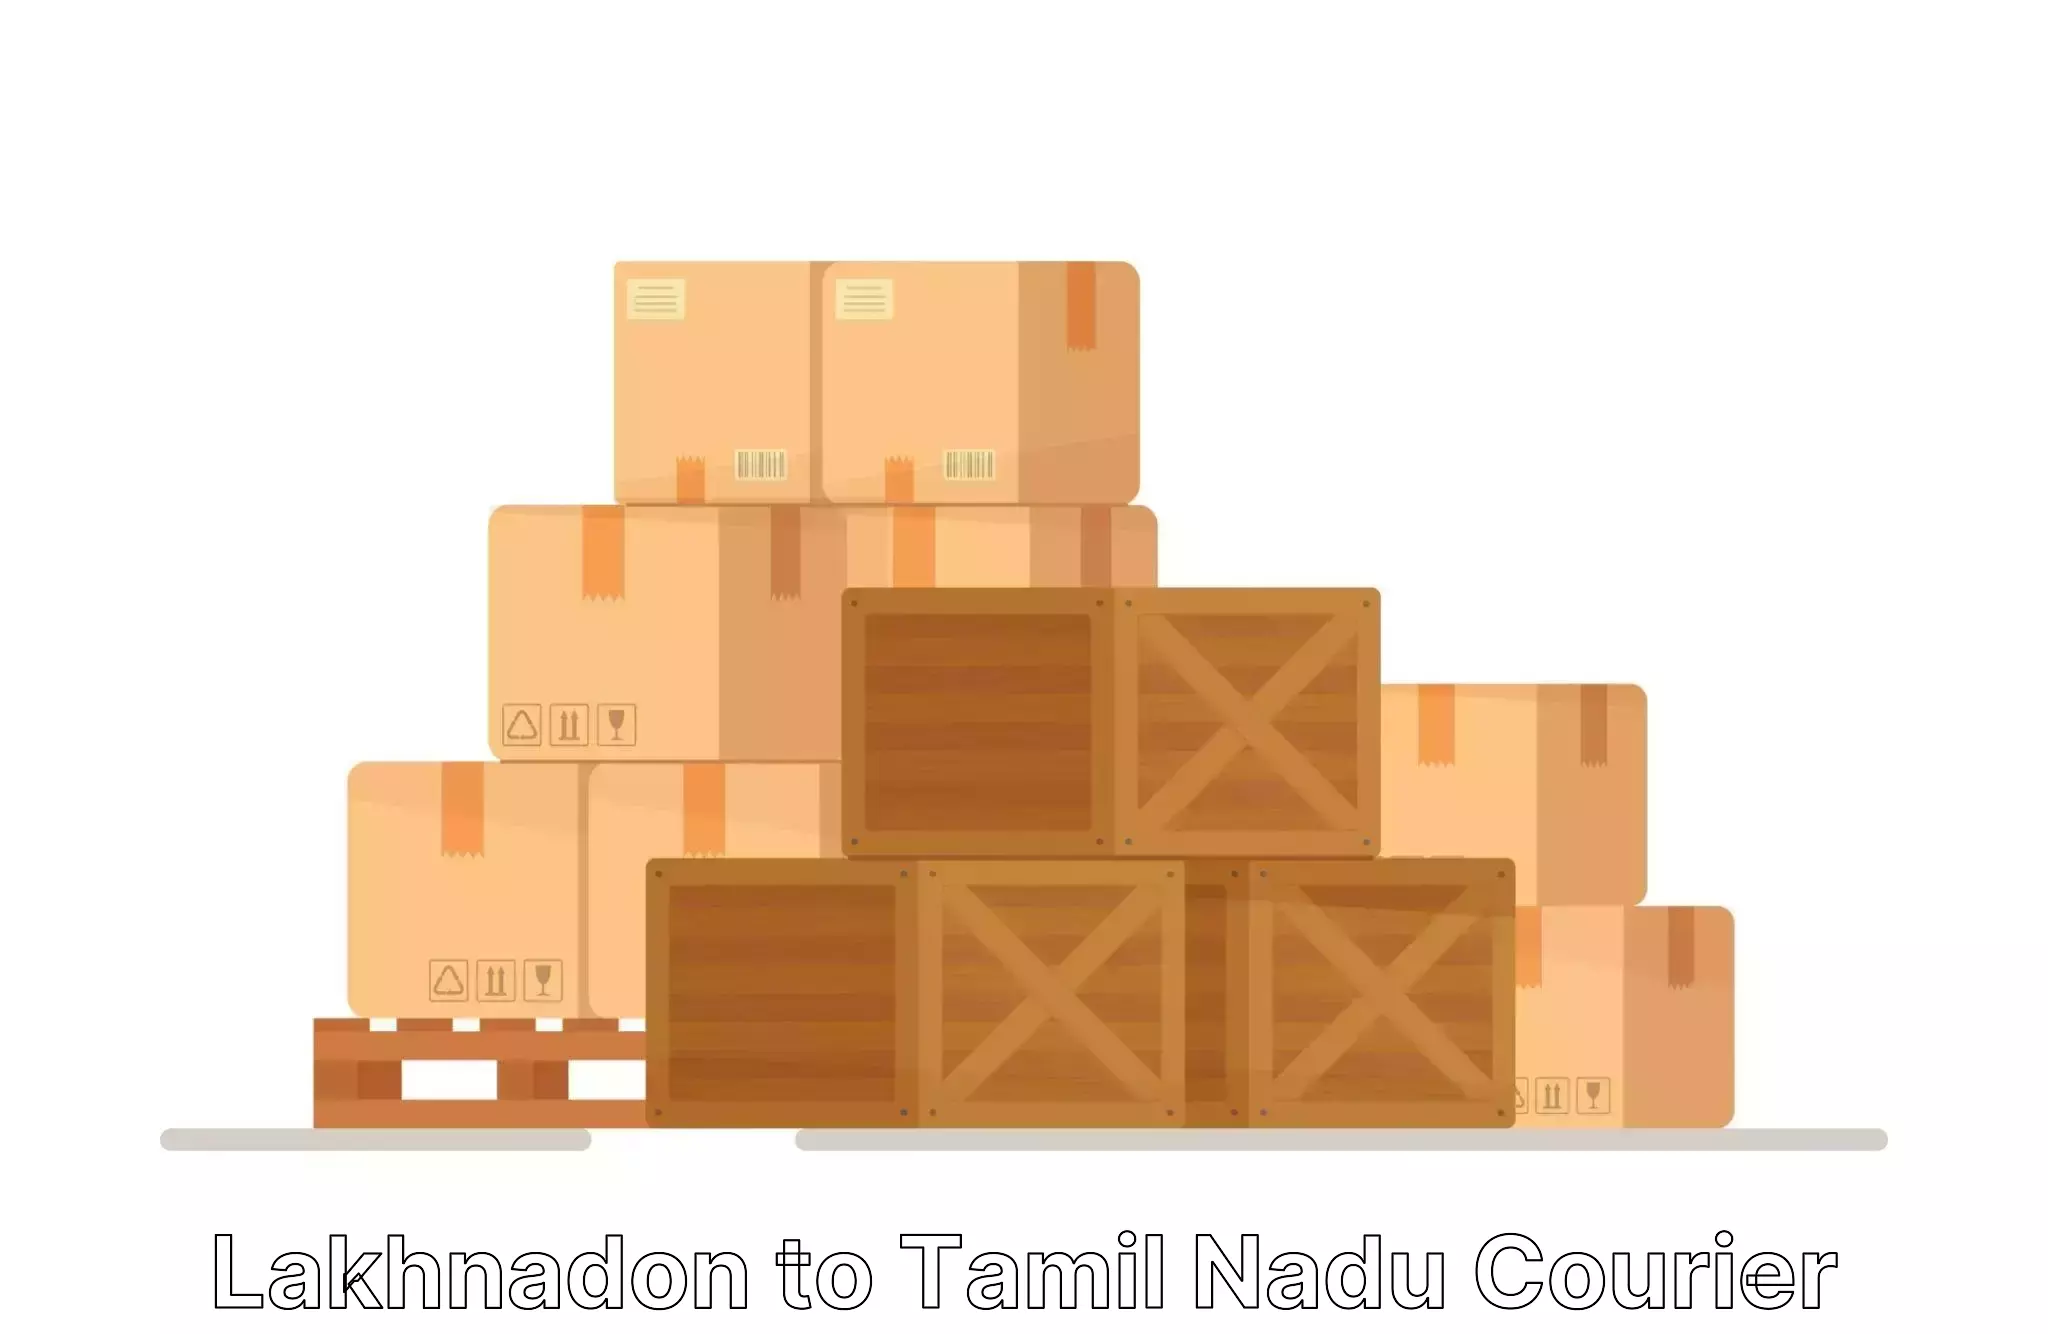 Full home relocation services Lakhnadon to Ayyampettai